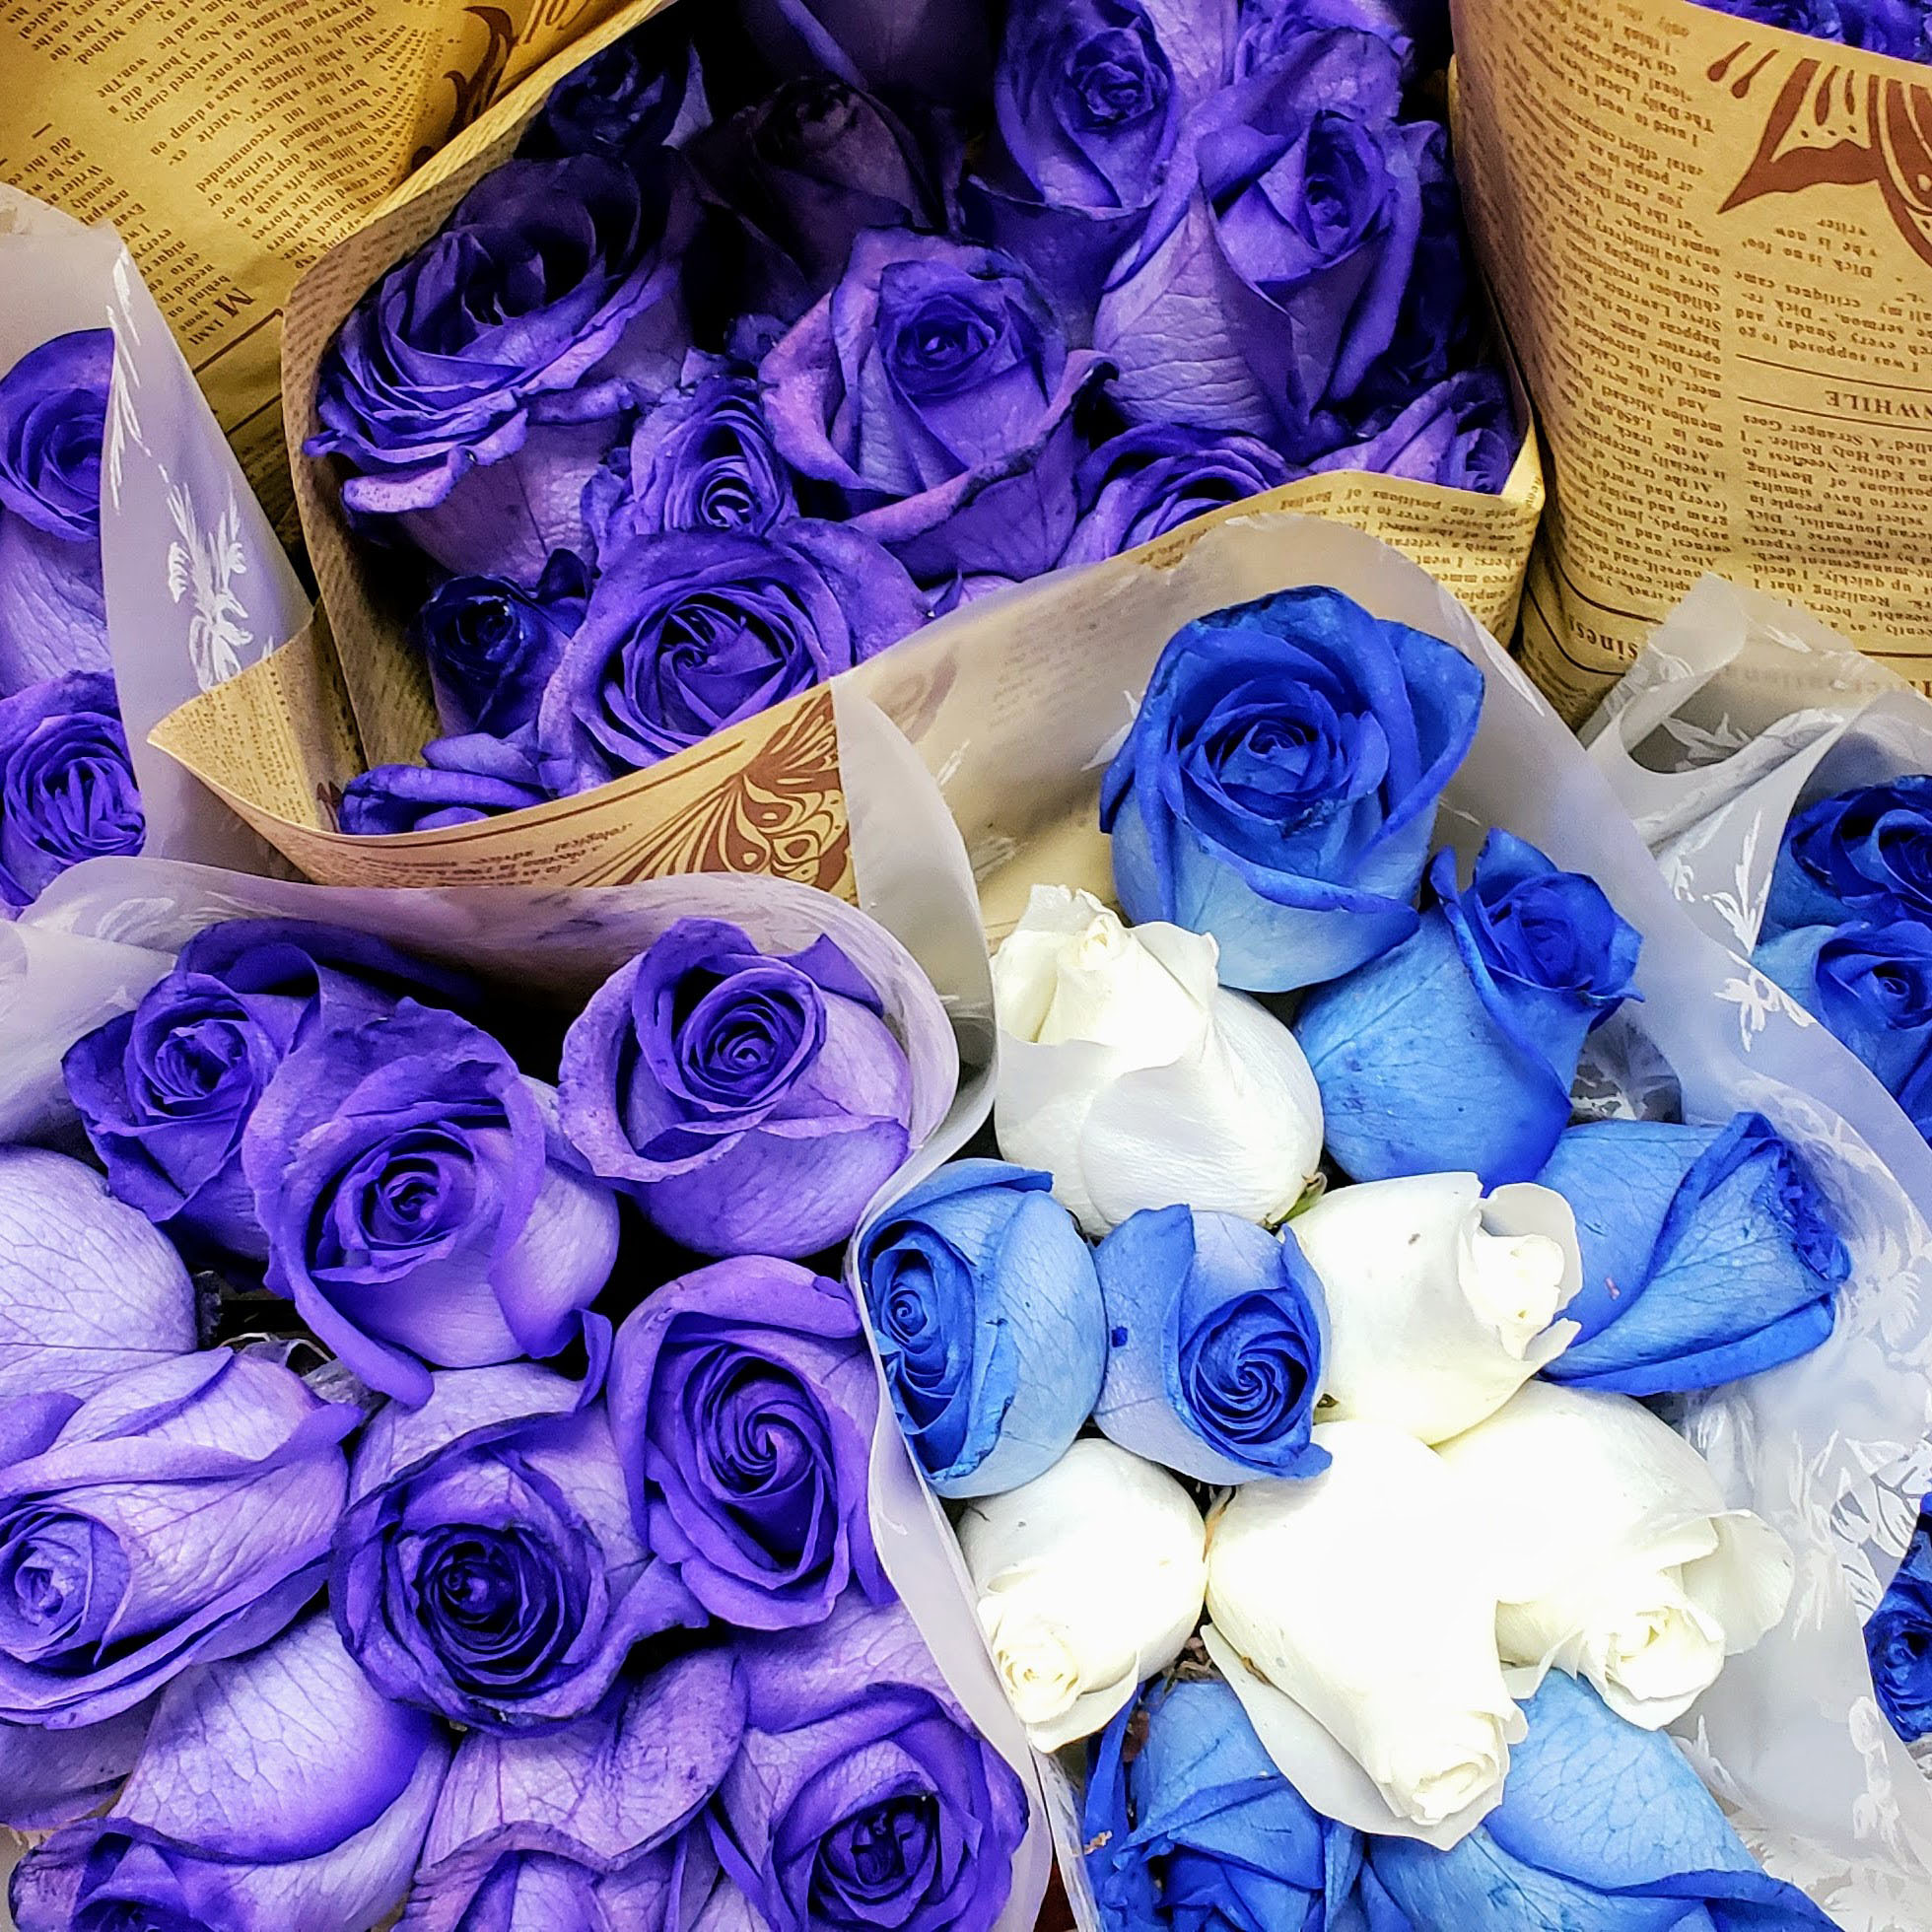 Mireya's Flowers Mother's Day Blue Roses and multi-colored Forever Roses are a steal compared to Westside prices